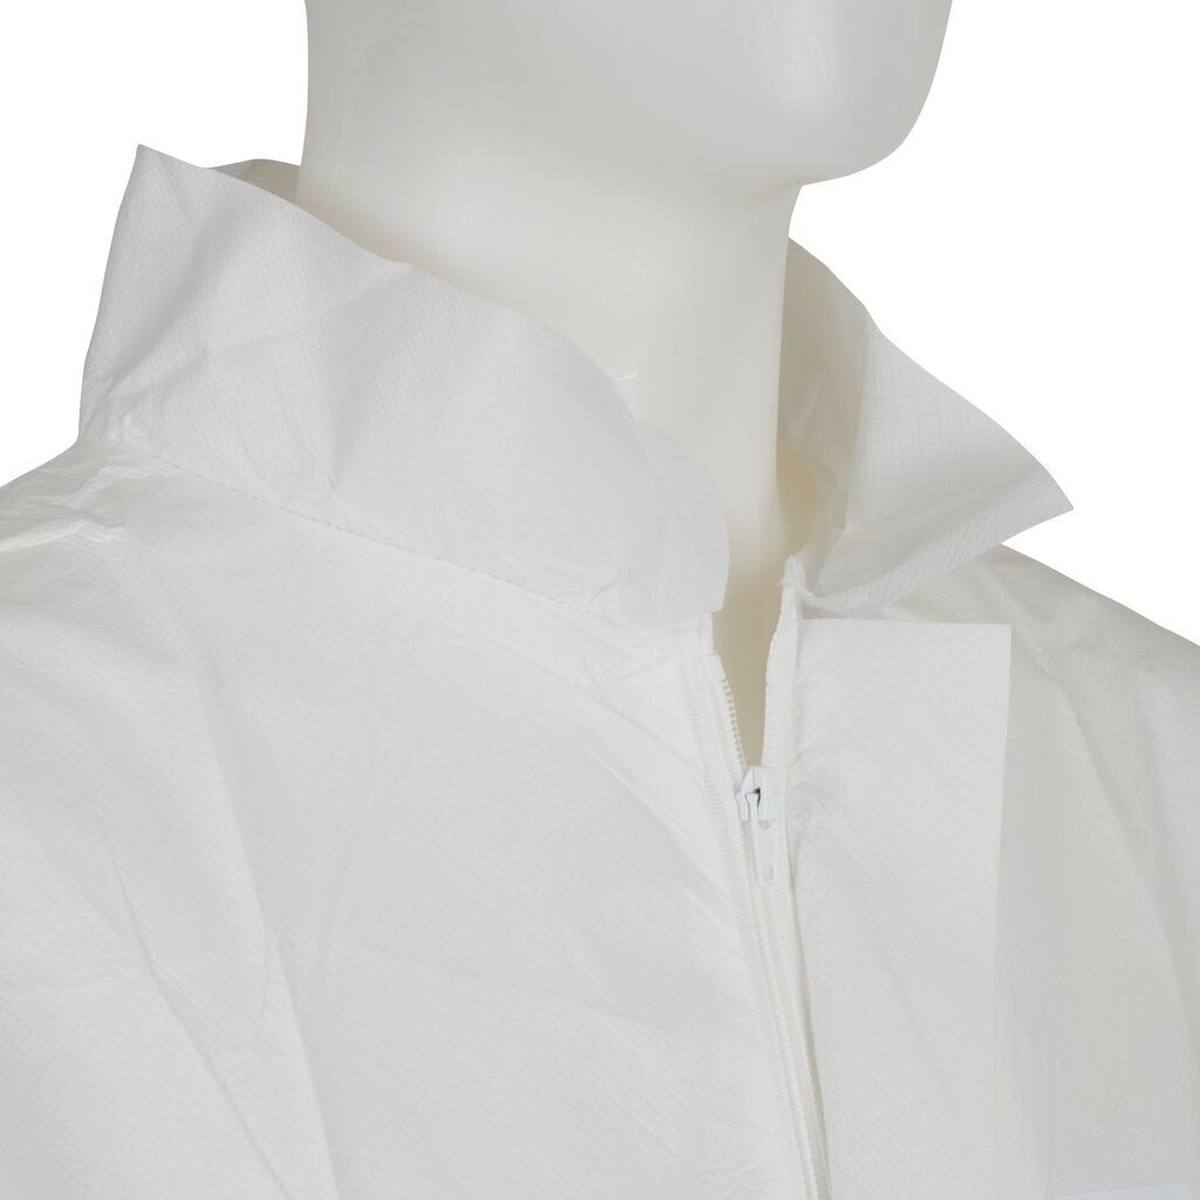 3M 4440 coat, white, size L, particularly breathable, very light, with zipper, knitted cuffs